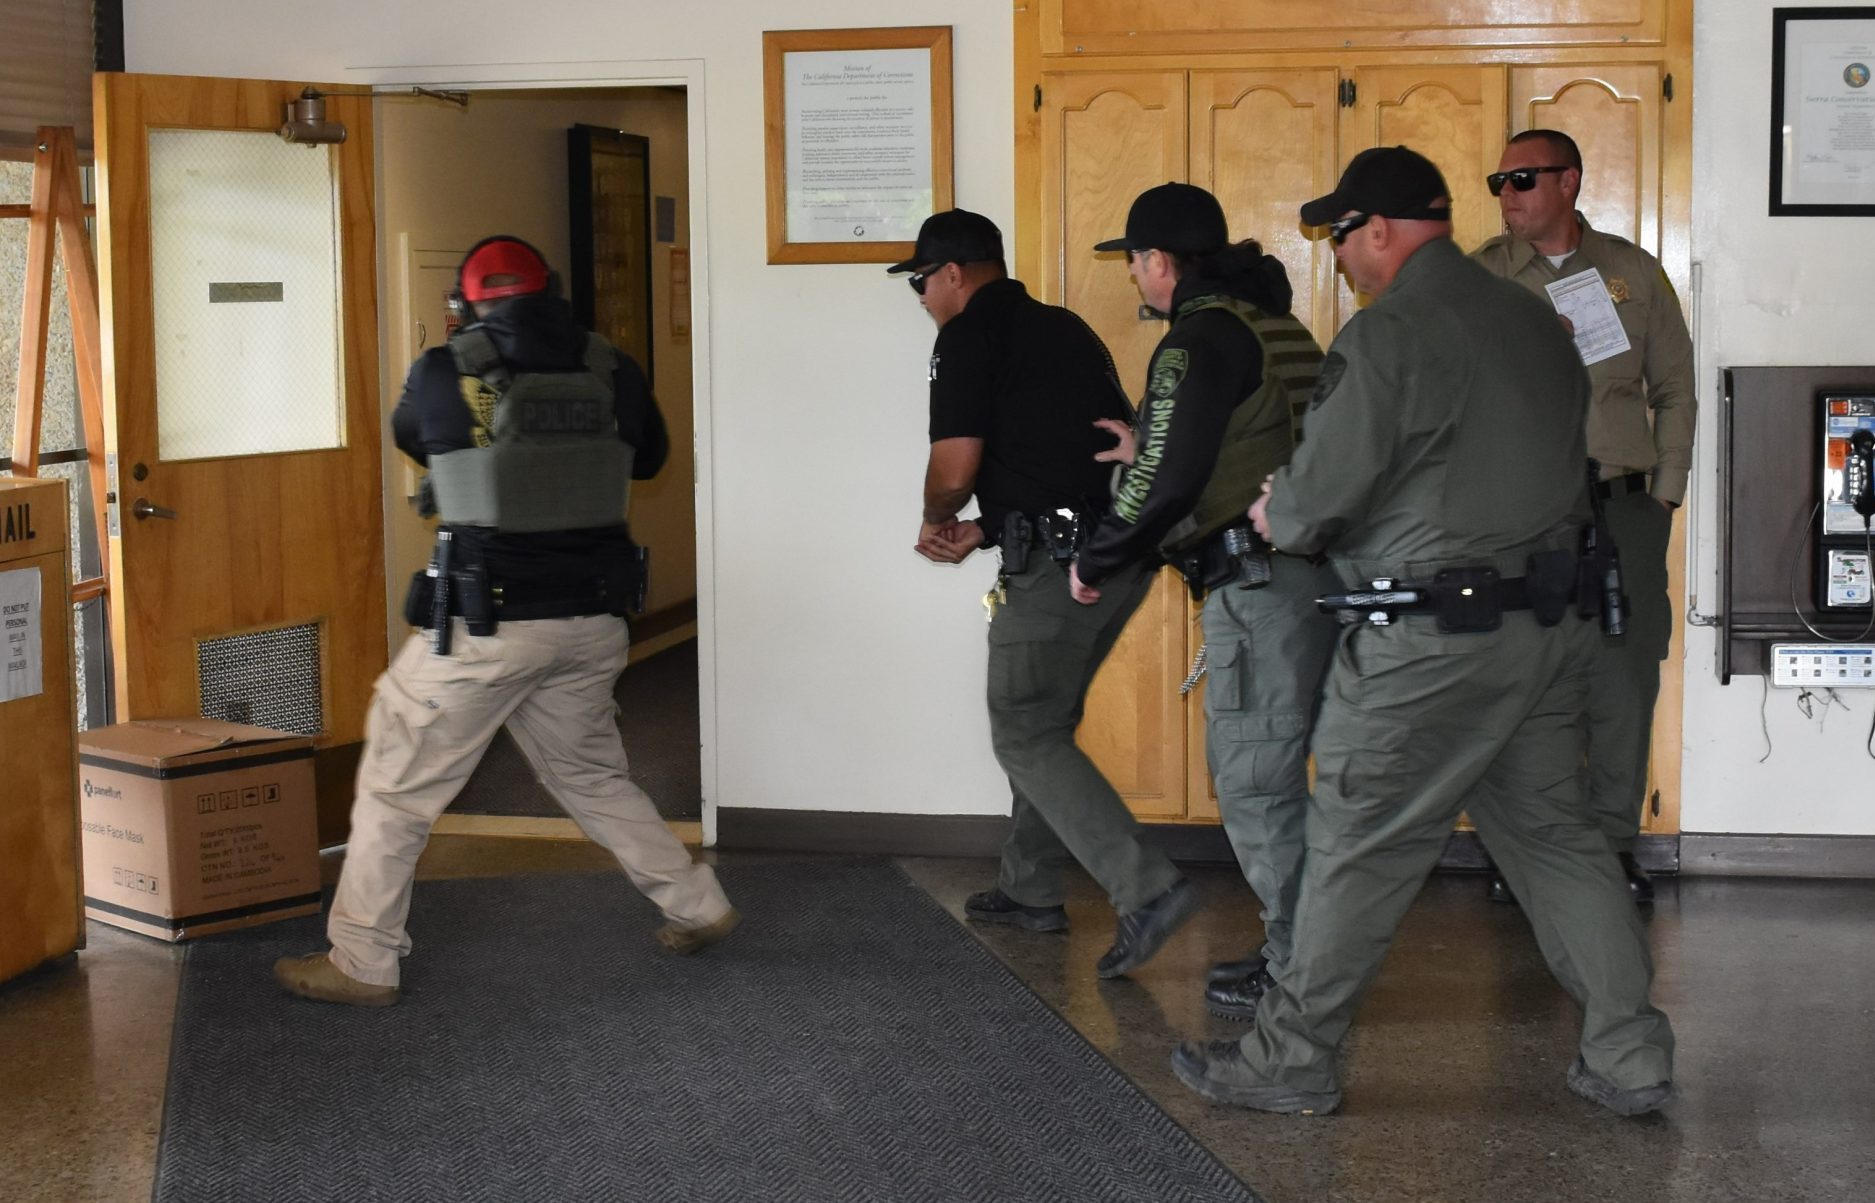 custody staff approaching door at SCC active shooter training